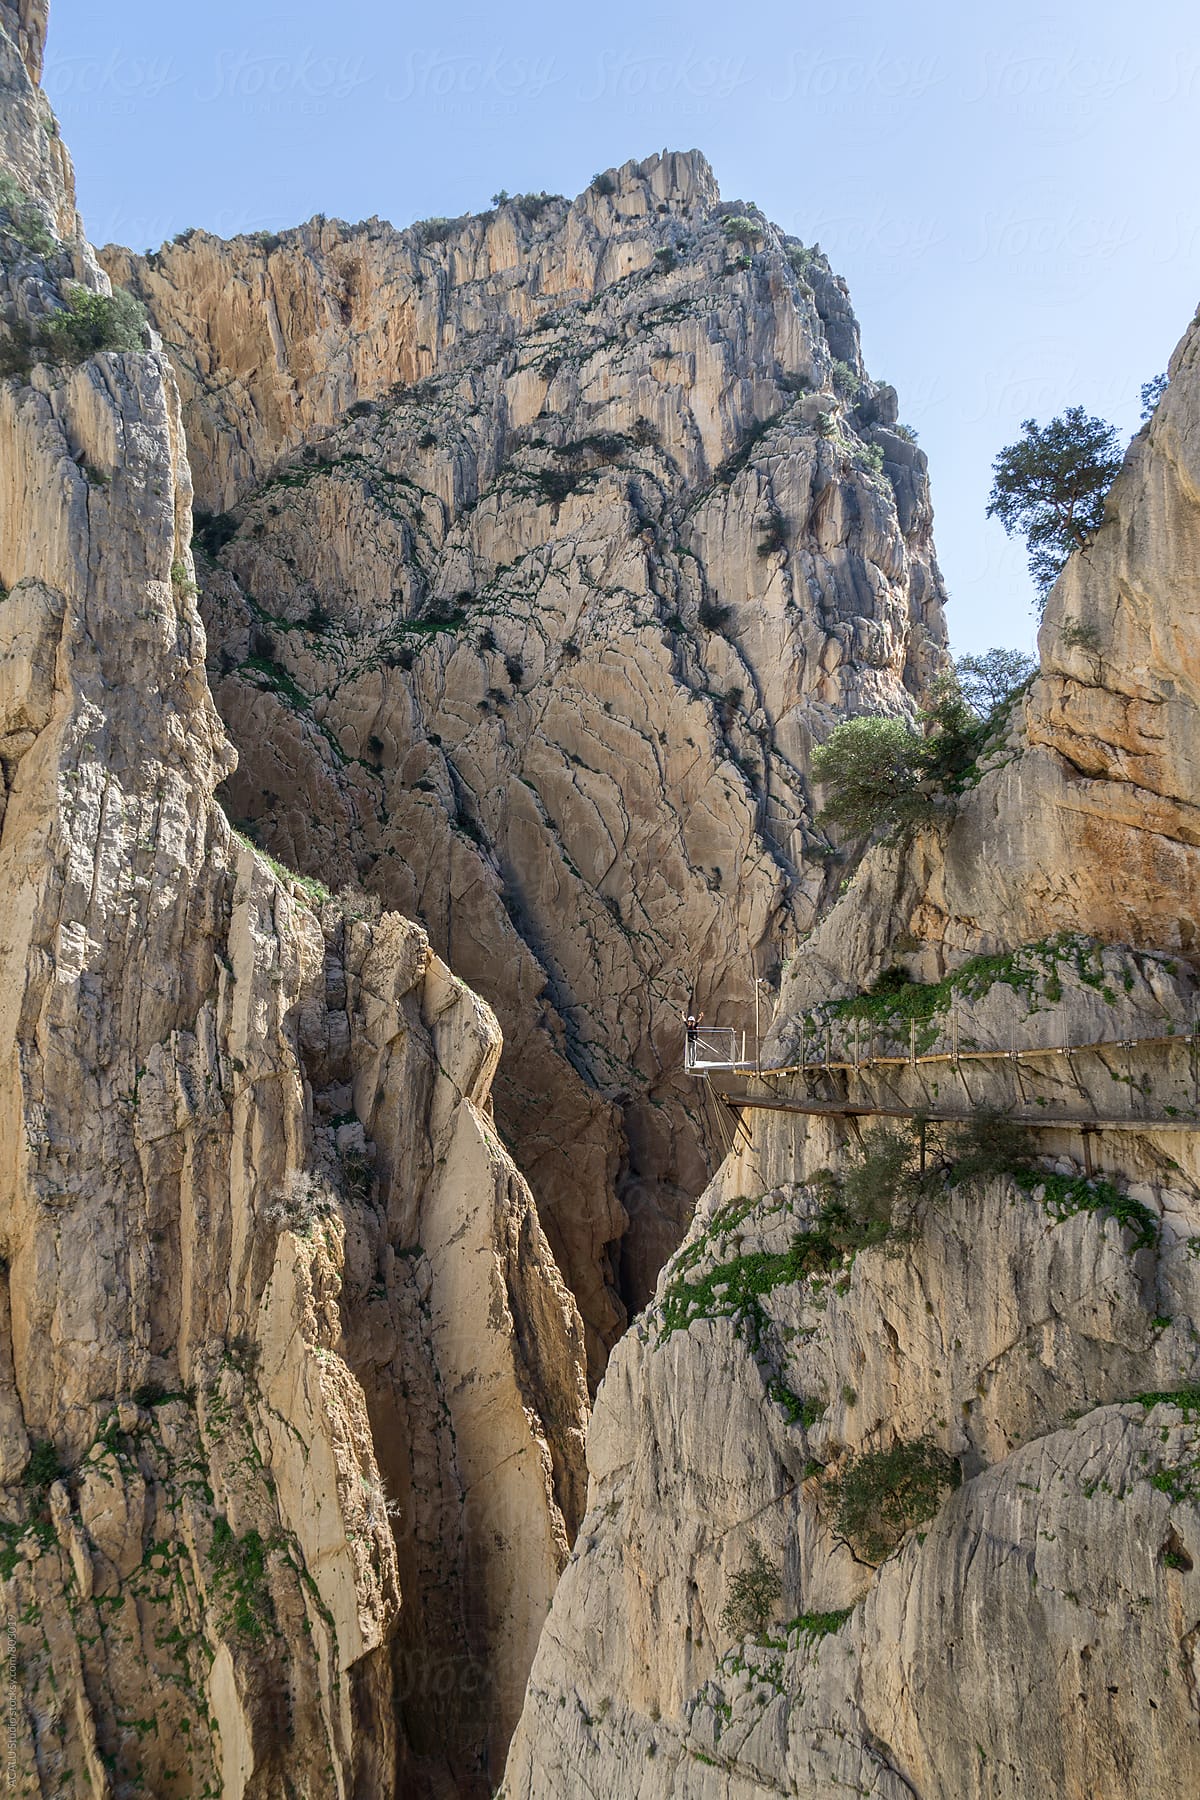 Woman saluting on the edge of a cliff in Caminito del Rey